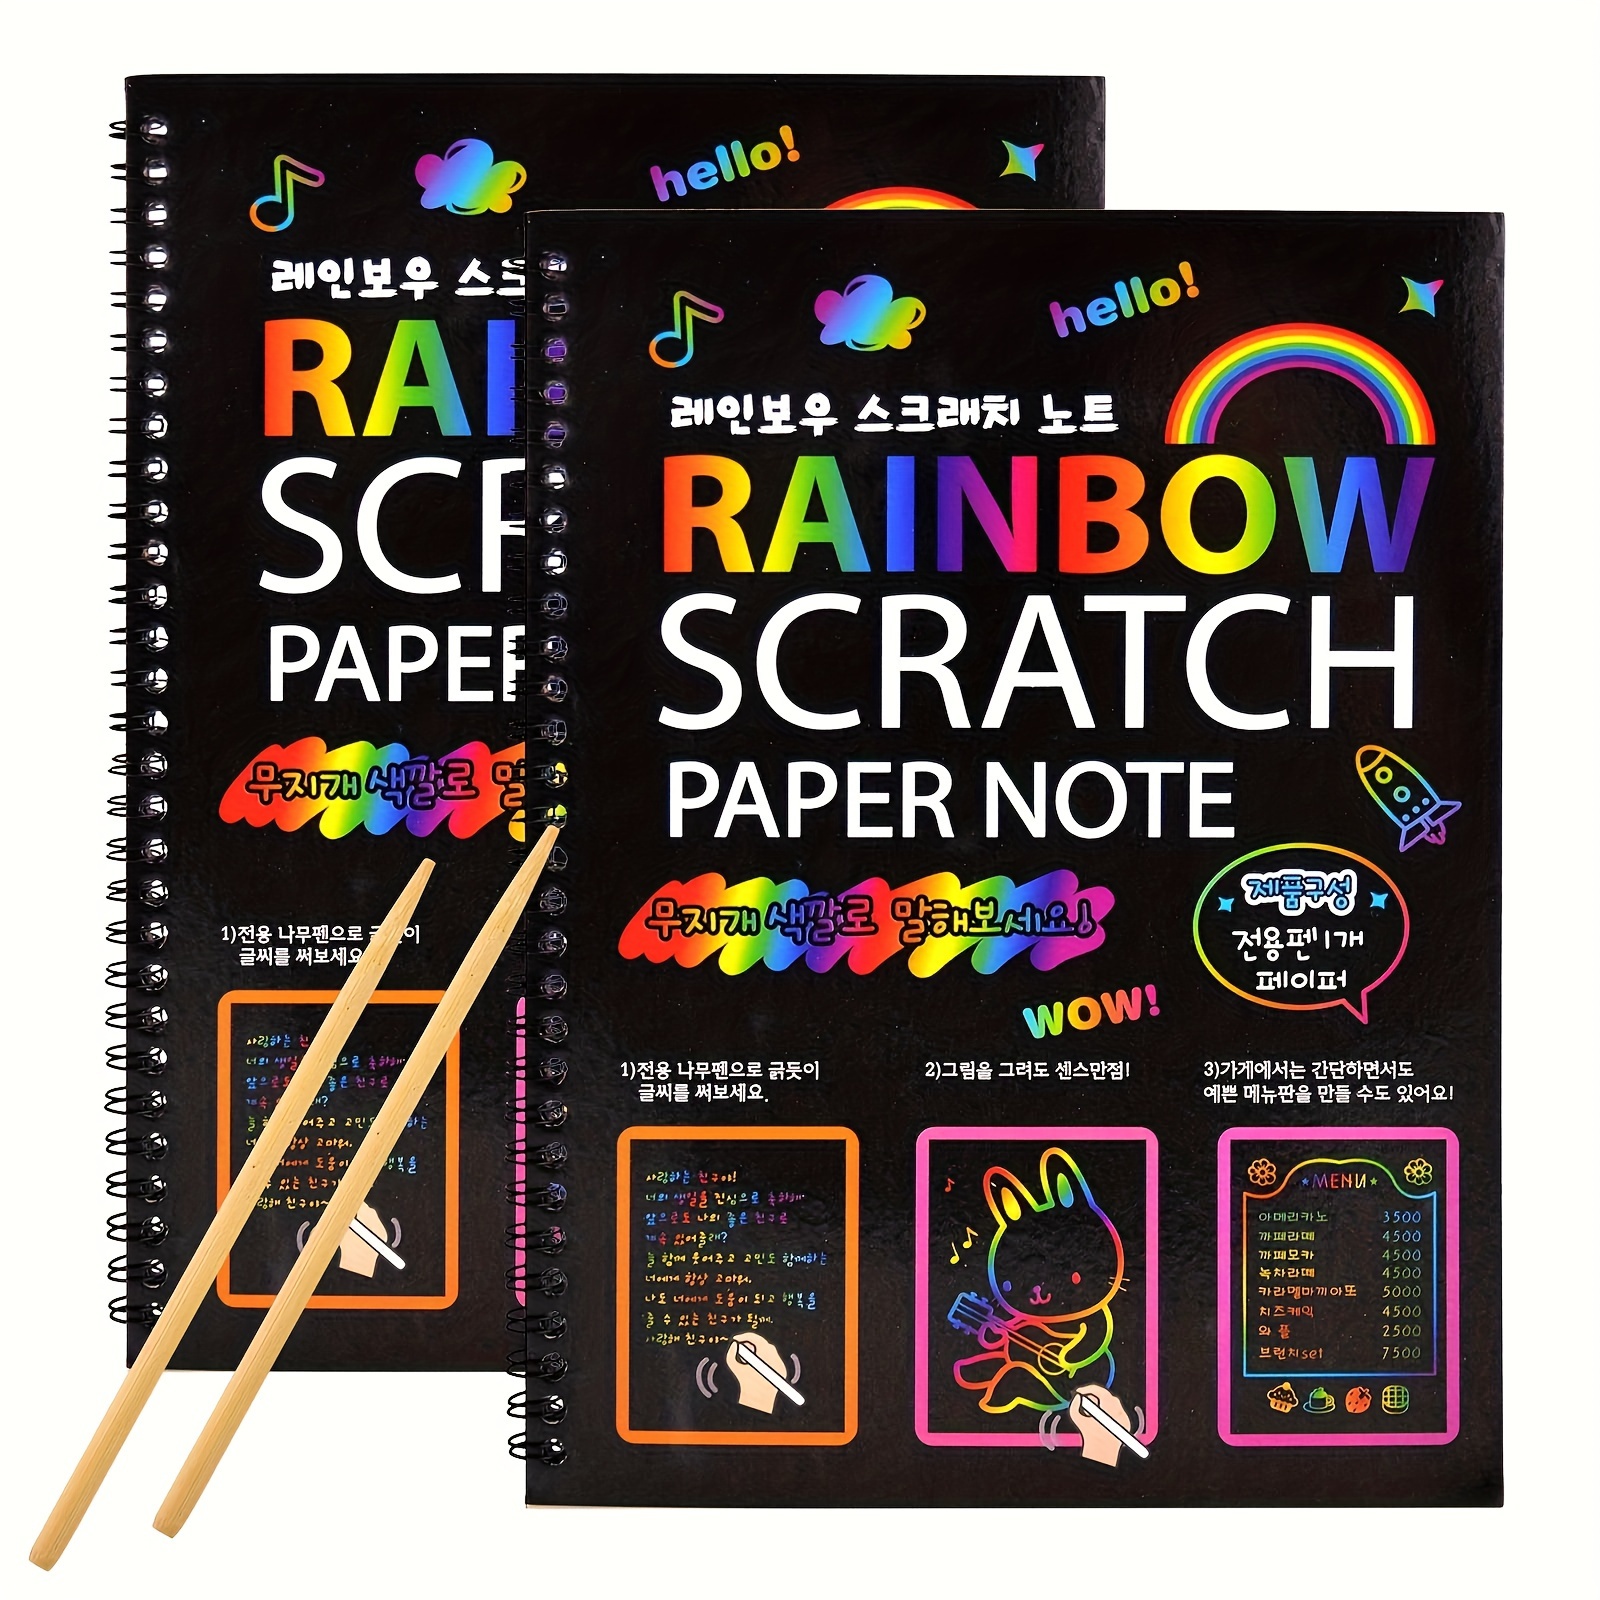 

Rainbow Magic Scratch Art Set - 2 Books With Black Paper, Neon Colors & Wooden Styluses For Creative Diy Crafts And Note Taking